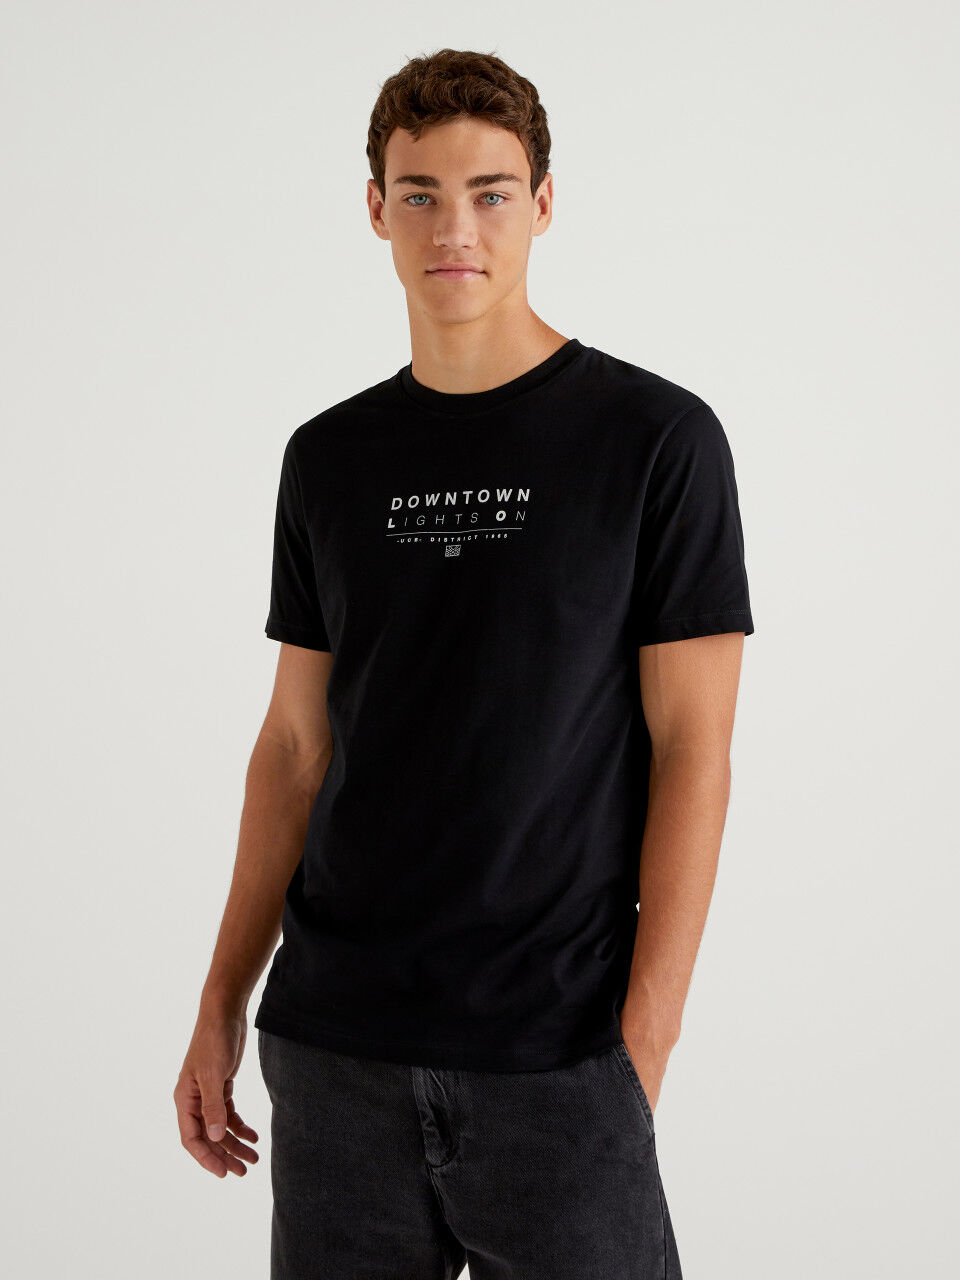 Men's T-shirts New Collection 2022 | Benetton